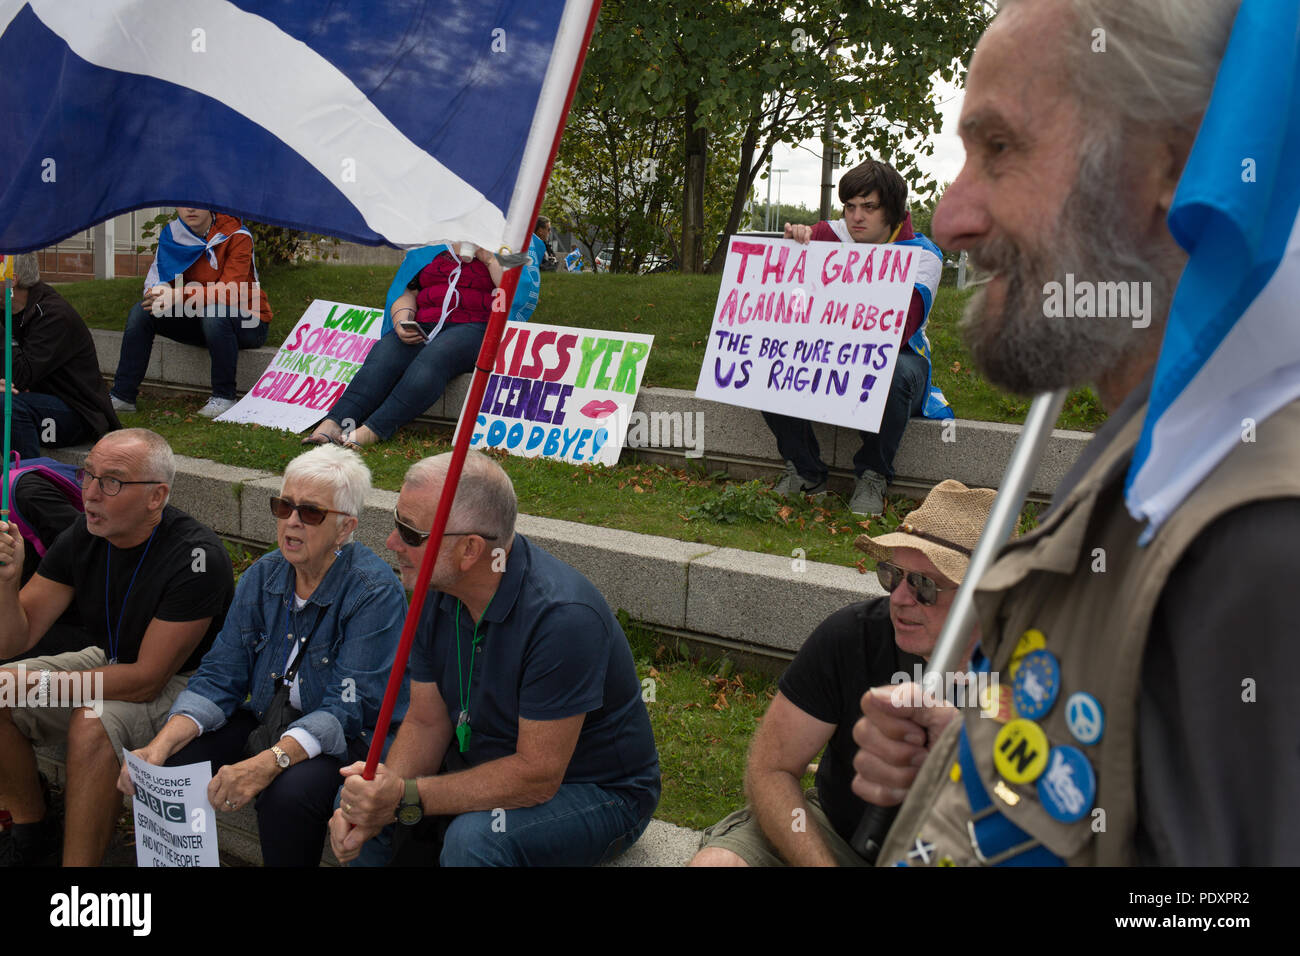 Glasgow, Scotland, on 11 August 2018. Pro-Scottish independence supporters protest against a perceived bias of the BBC against Scotland and the pro-Scottish indpendence movement. Approximately 300 people took part in the protest outside the BBC at Pacific Quay, in Glasgow, Scotland. Image credit: Jeremy Sutton-Hibbert/ Alamy News. Stock Photo